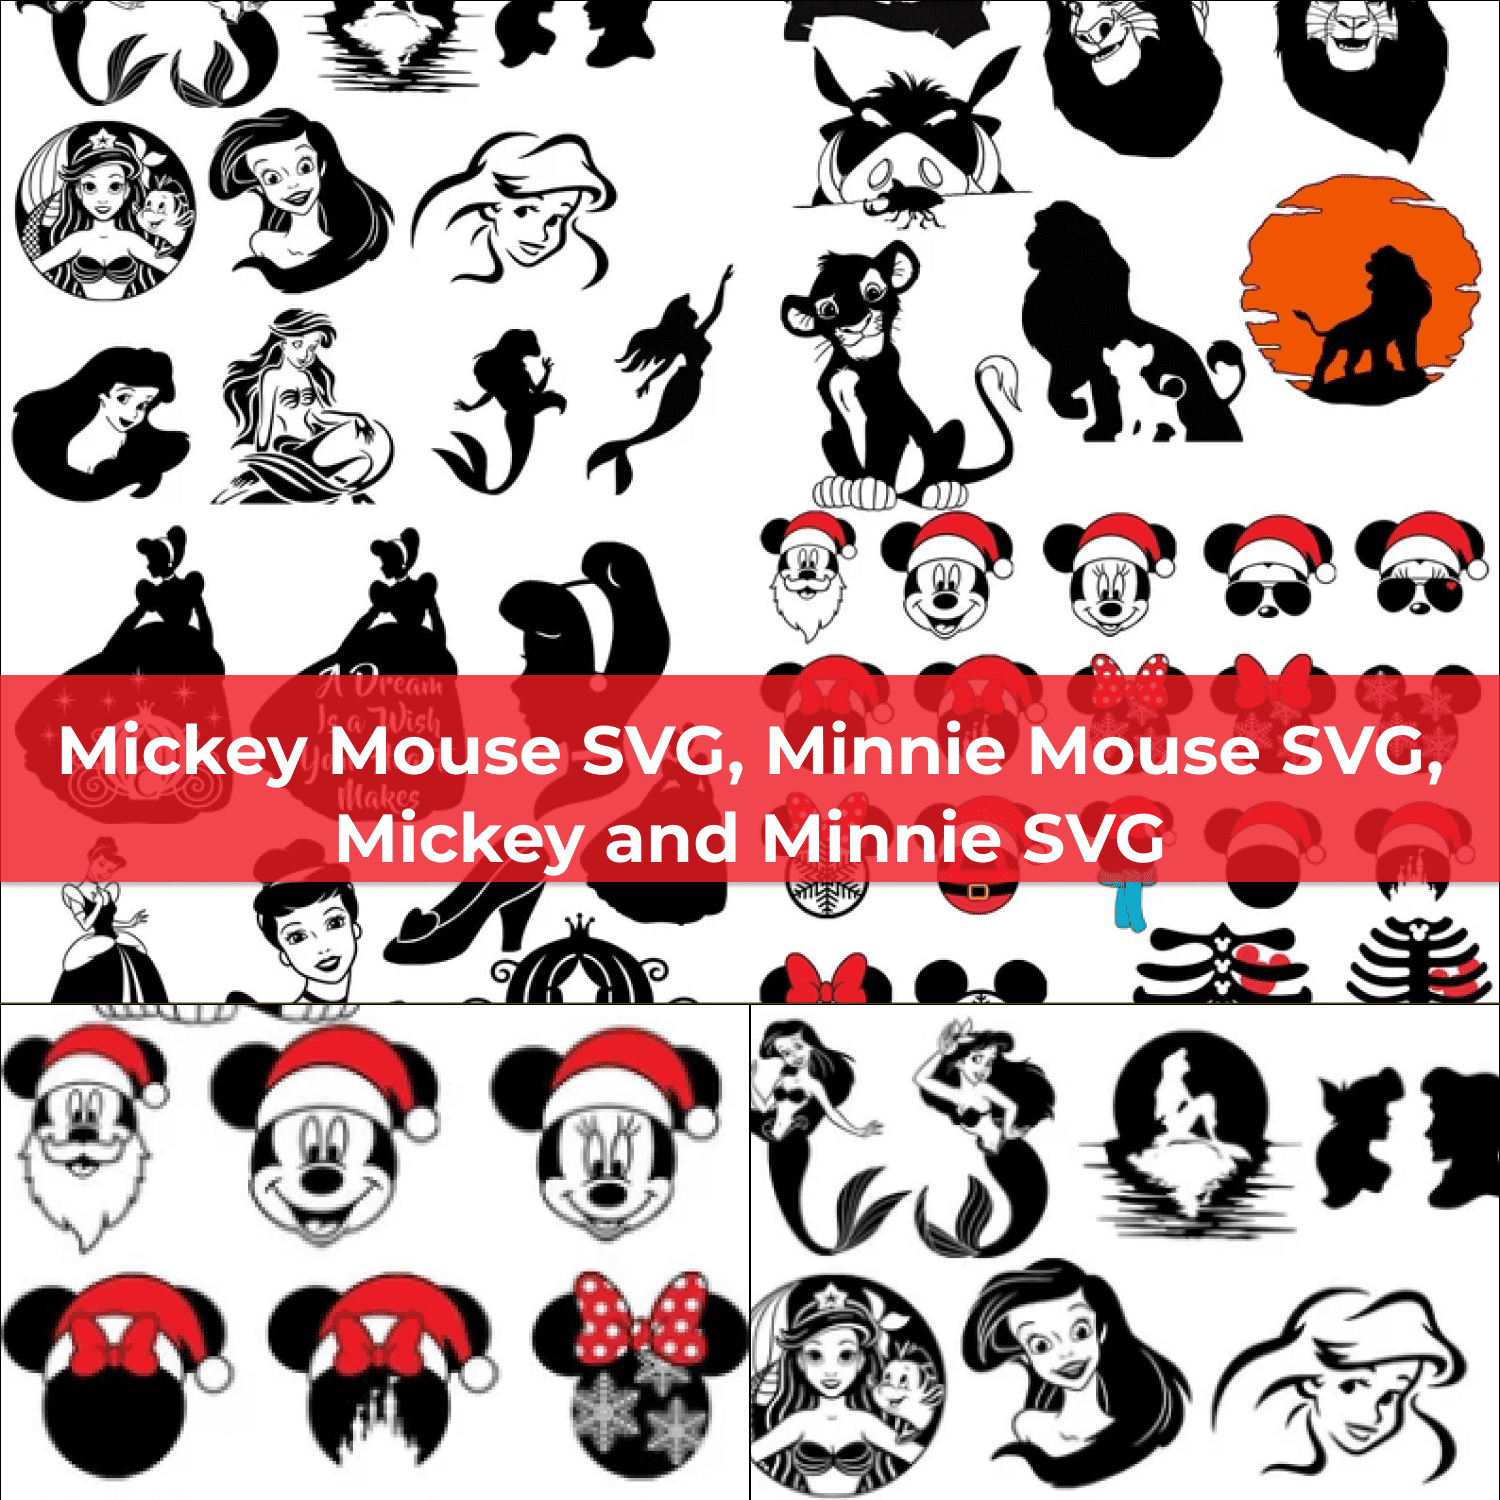 Mickey and Minnie SVG cover.